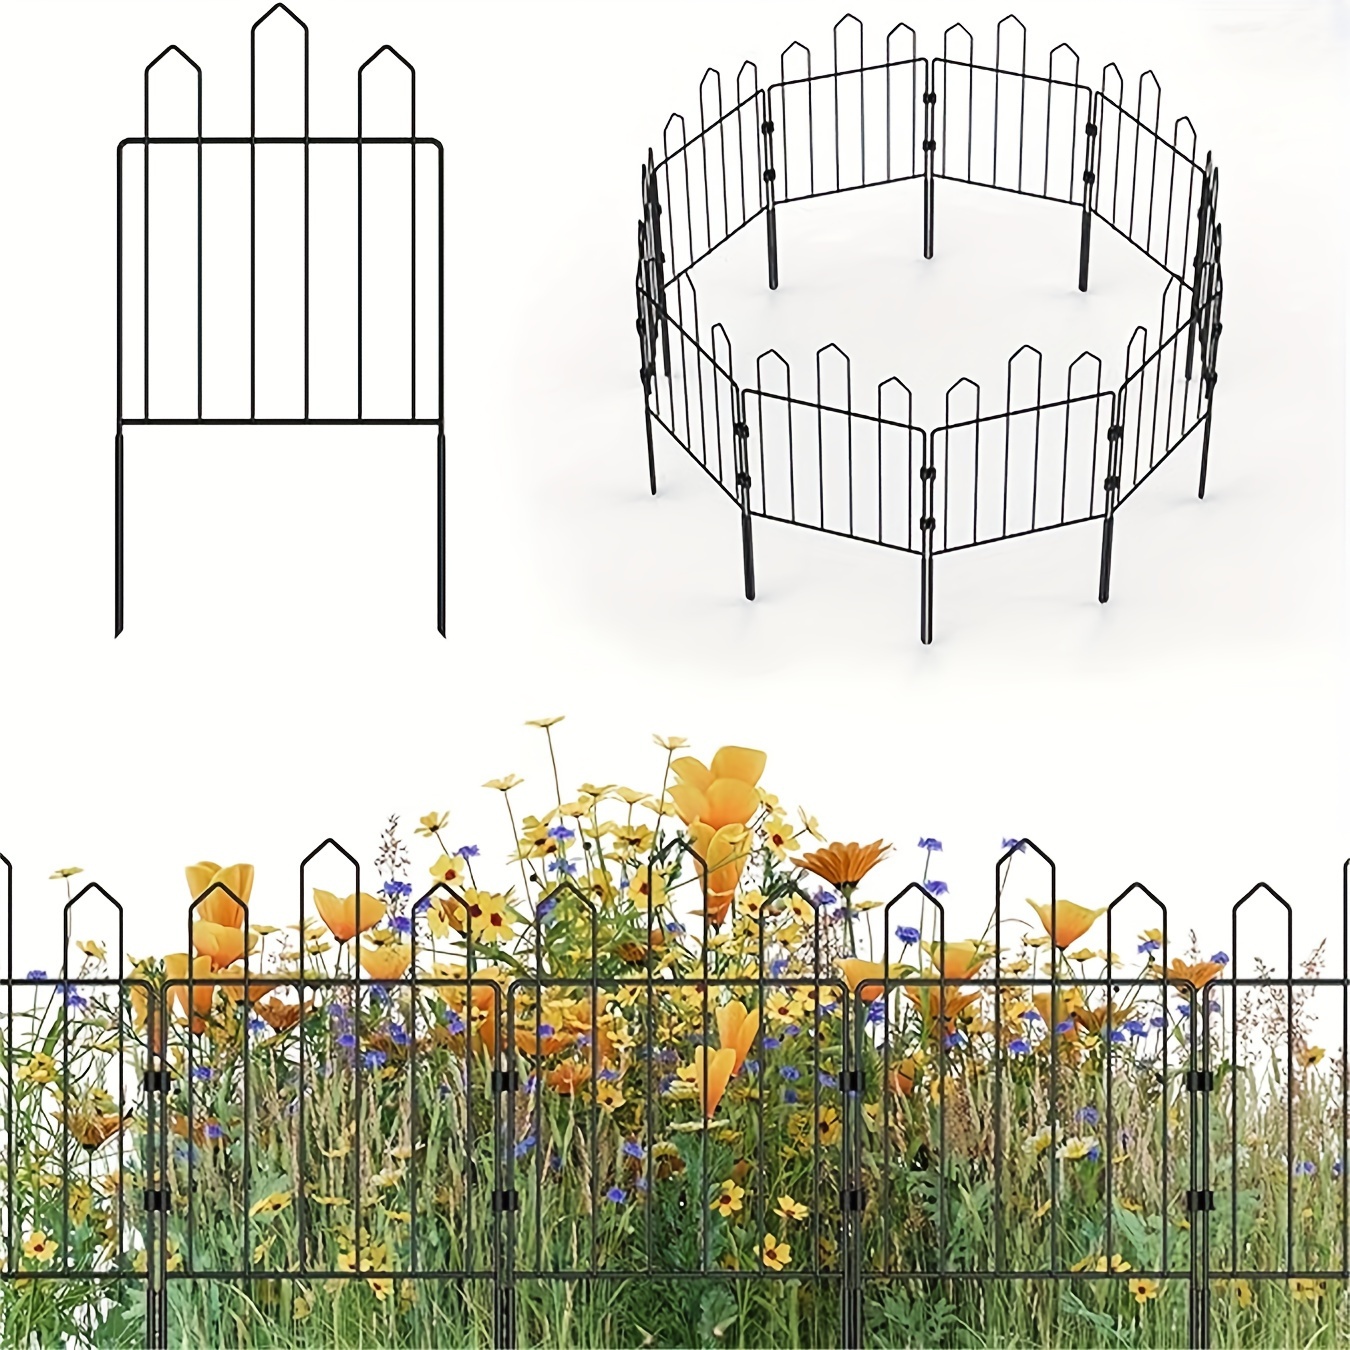 

10 Panels Decorative Garden Fence No Dig Metal Wire Garden Fence Border Dog Rabbit Animal Barrier Fence Smal Flower Bed Fencing For Yard Landscape Patio Outdoor, Total 10ft (l) X 23.5in (h)